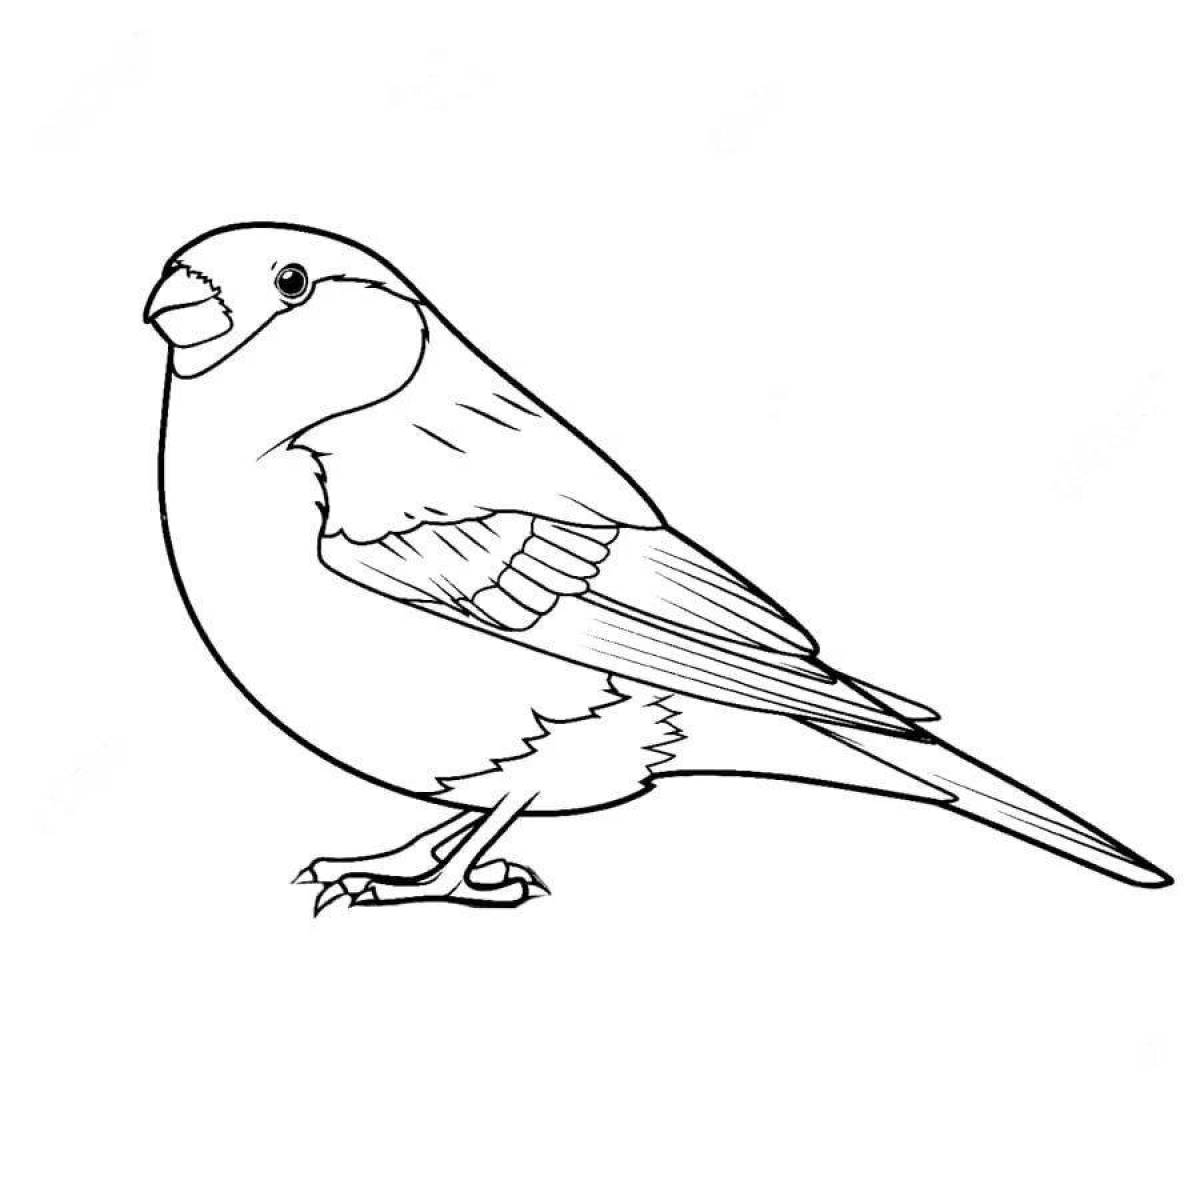 Coloring page mysterious pattern of tits